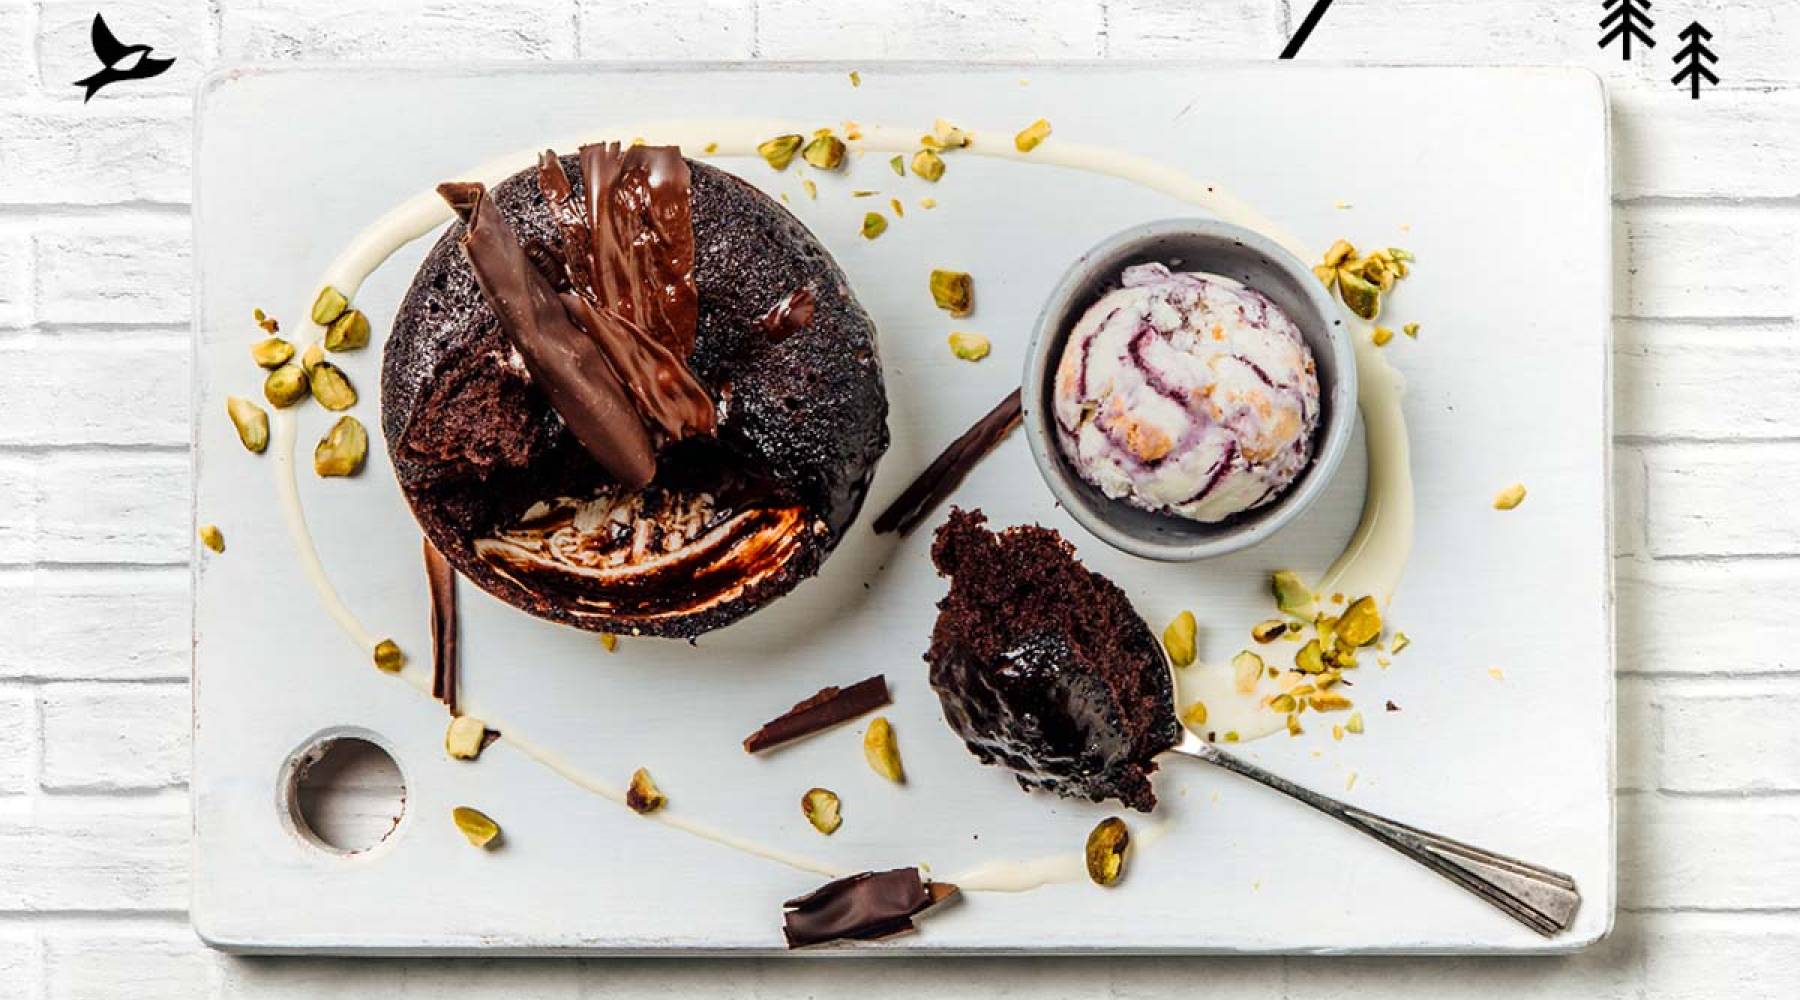 Mövenpick Hotel Colombo - Get caked this week! We have got the sweetest  offer to end the month of June on a sugary high note. Enjoy up to 20% Off  on Selected